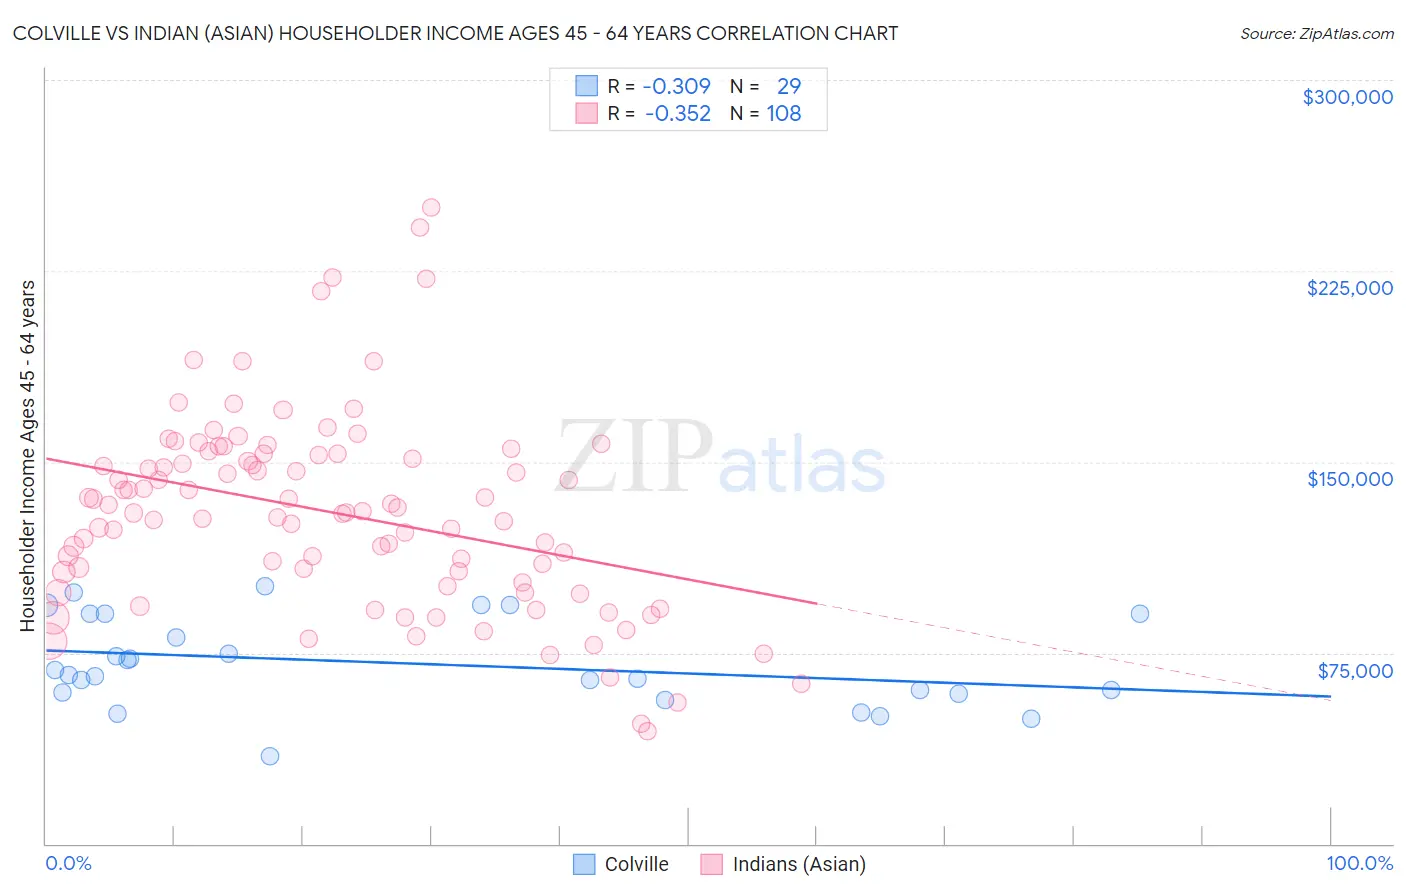 Colville vs Indian (Asian) Householder Income Ages 45 - 64 years